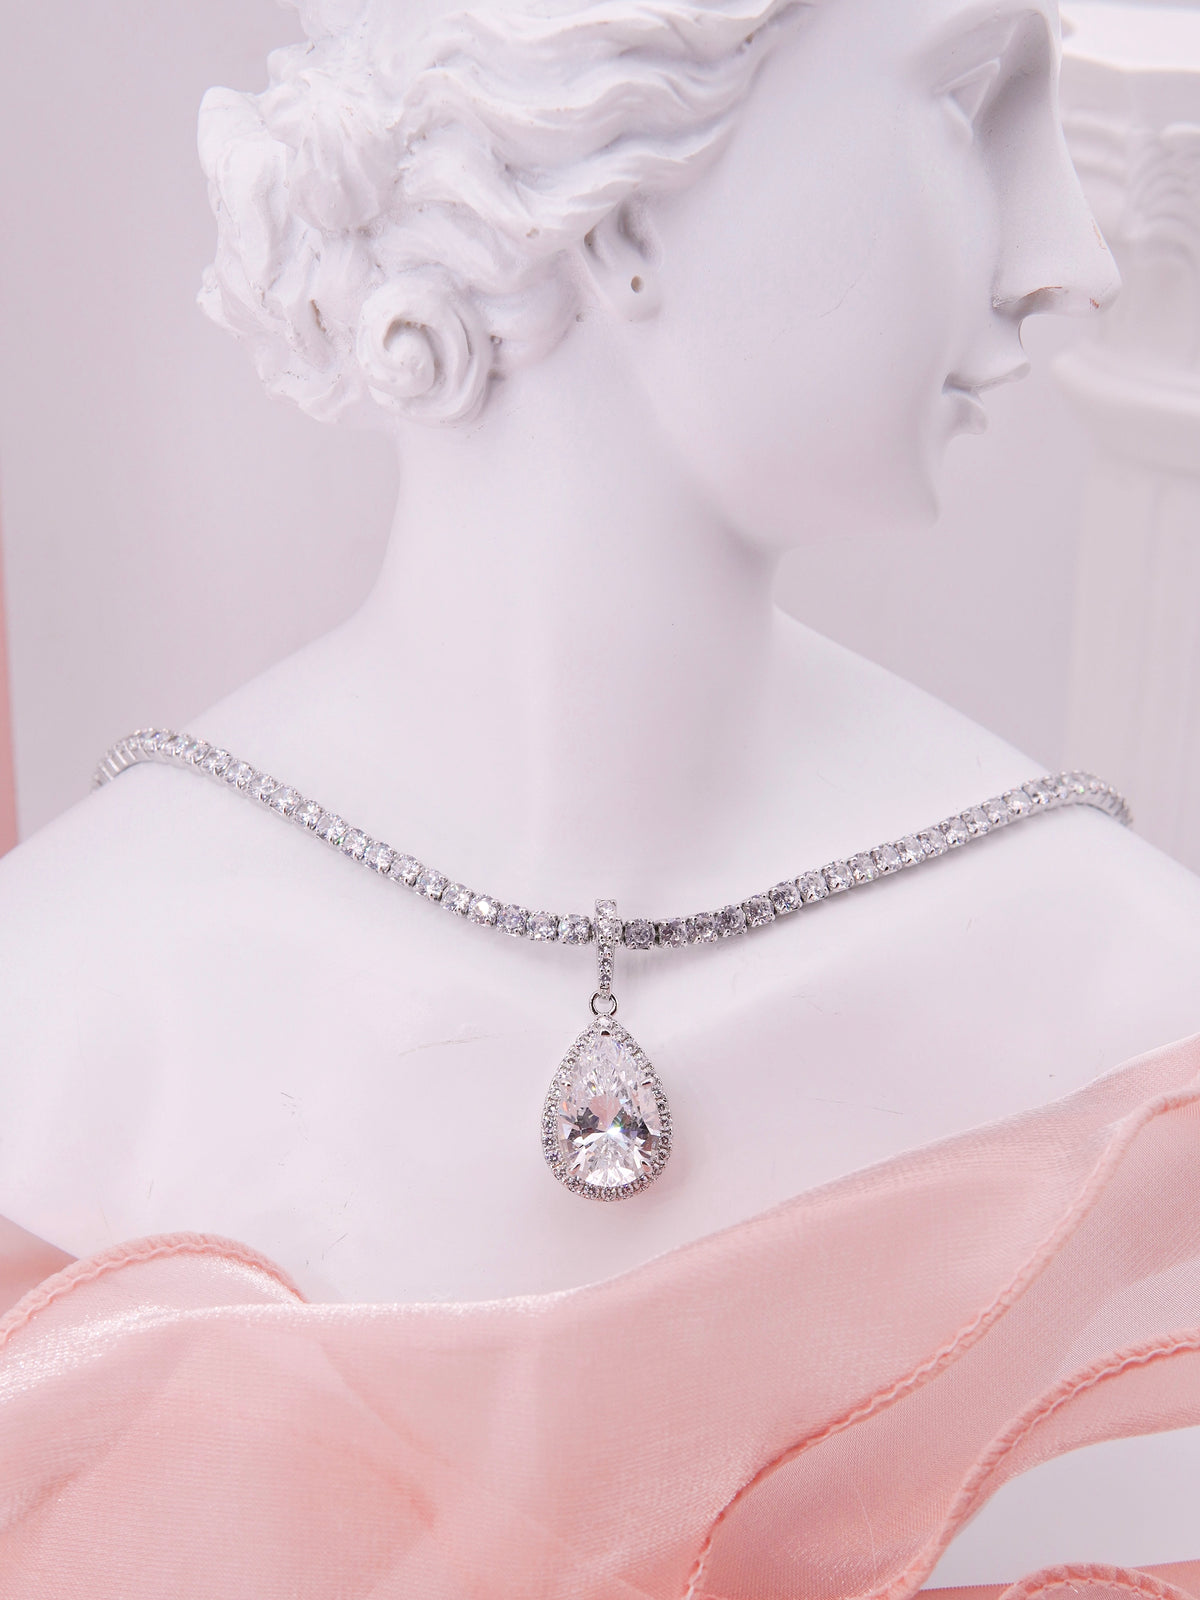 LAFIT· Glamorous Queen - Necklace 貴族女王重工閃鑽頸鏈